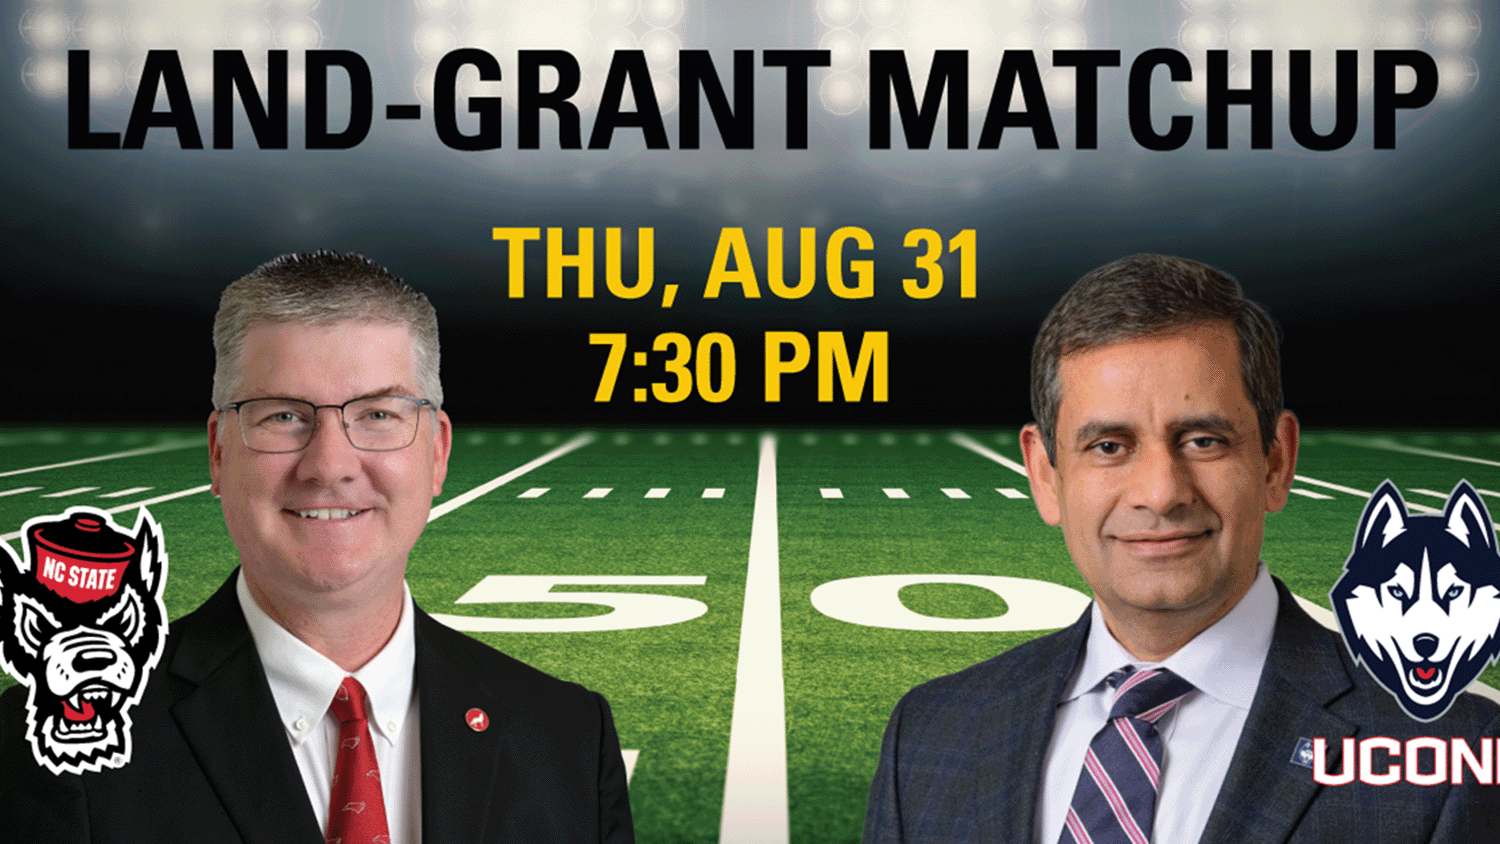 Land-grant matchup with deans from NC State CALS and UConn